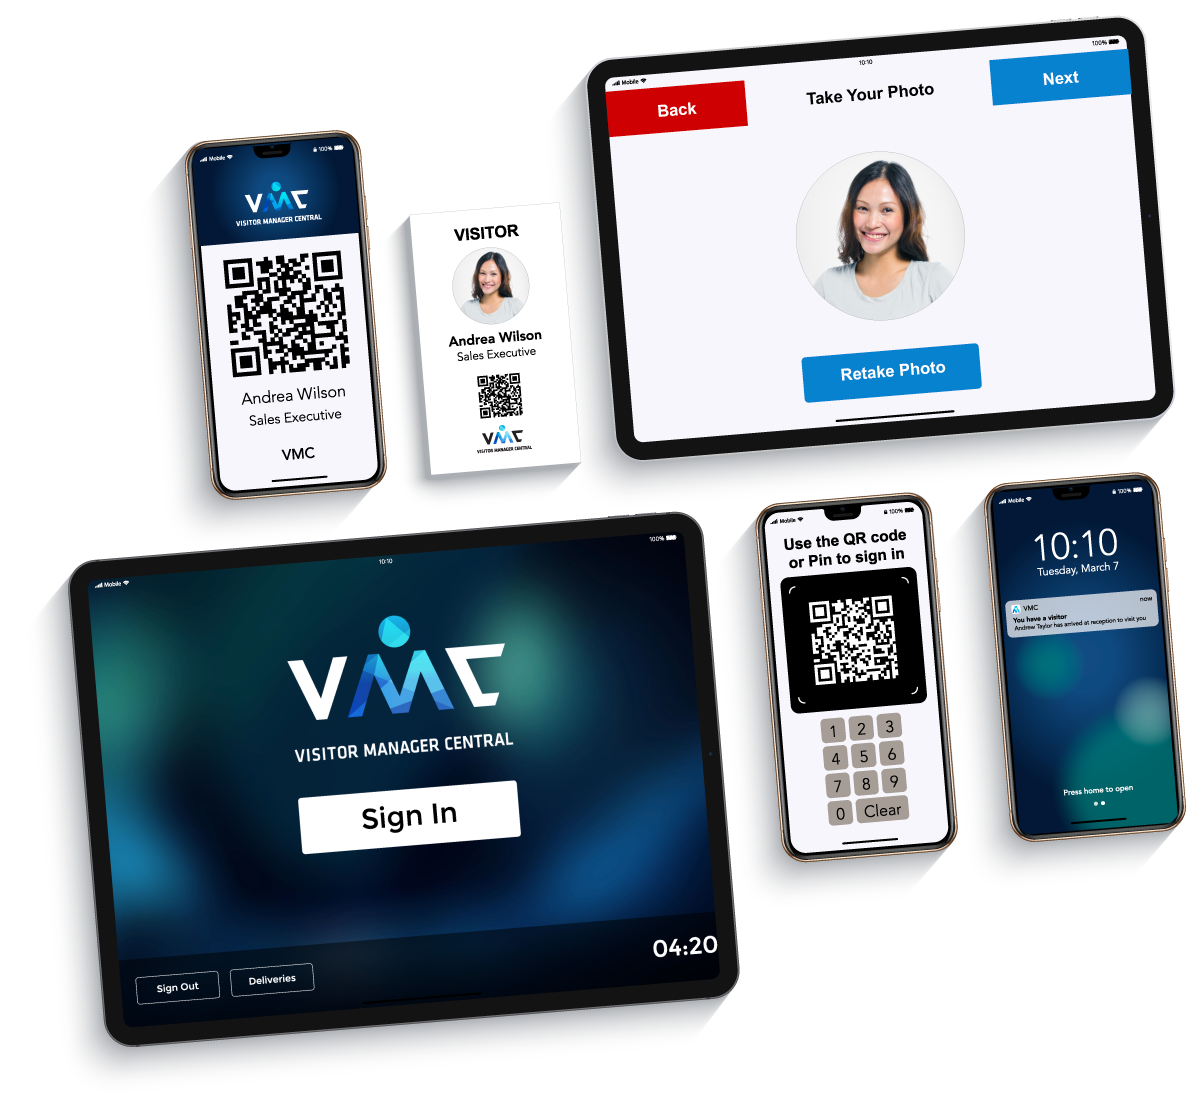 VMC visitor management features